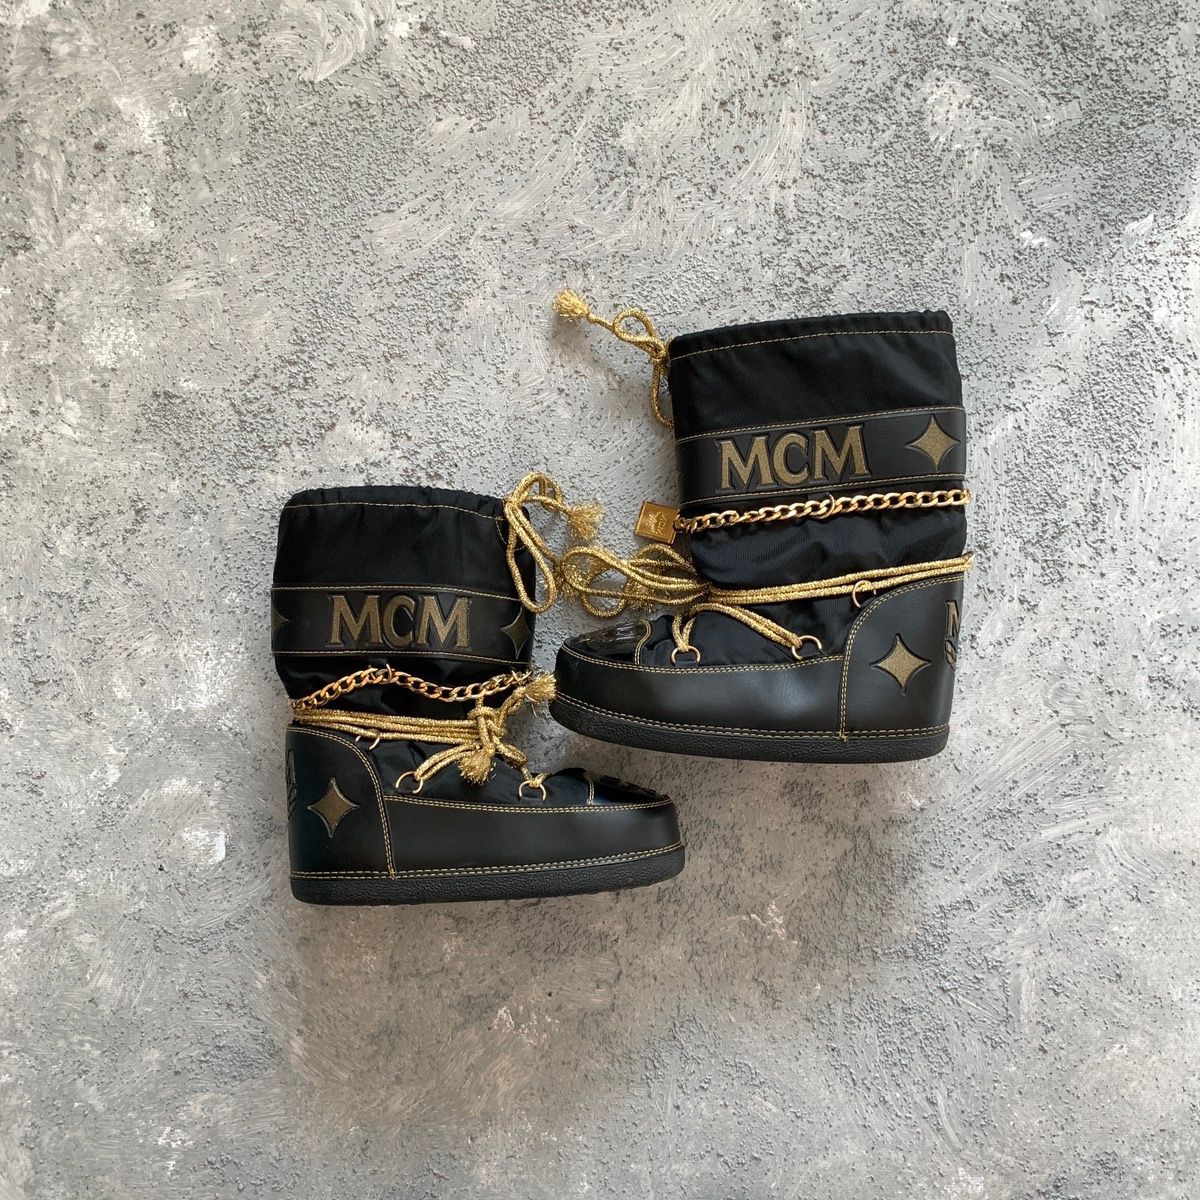 Vintage MCM Moon boots | Grailed